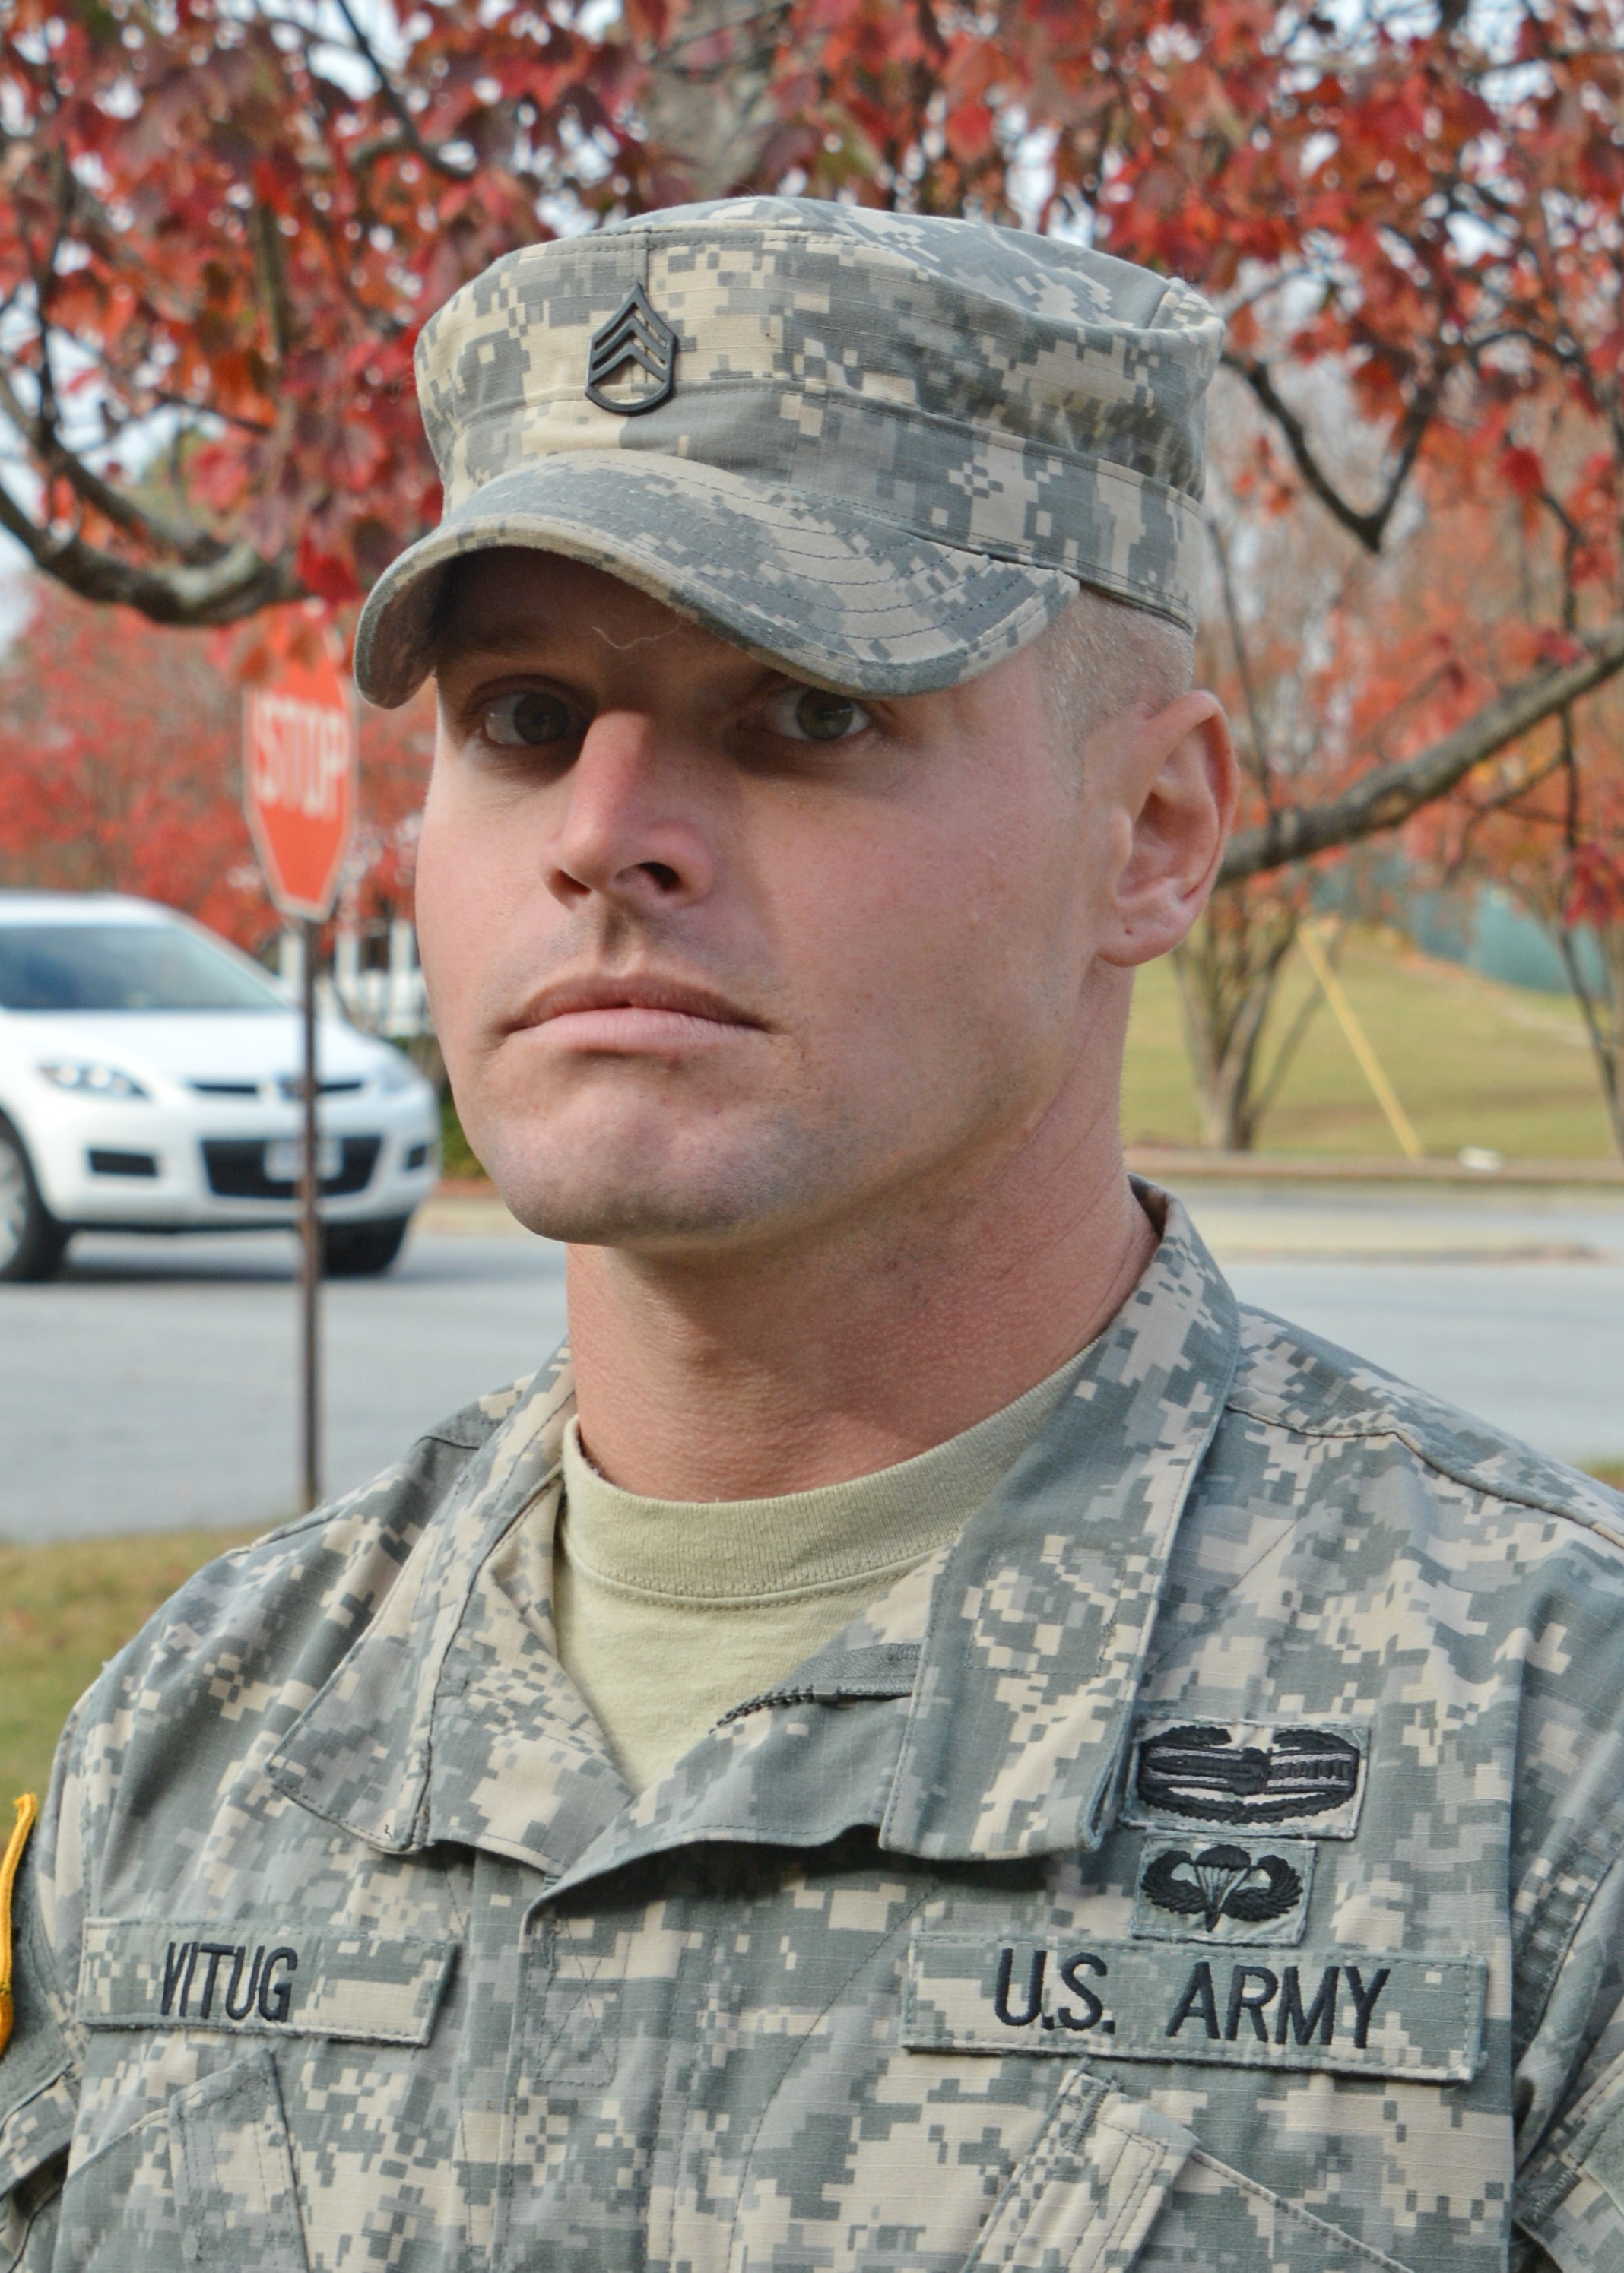 Drill sergeant graduates Ranger School with top honors Article The